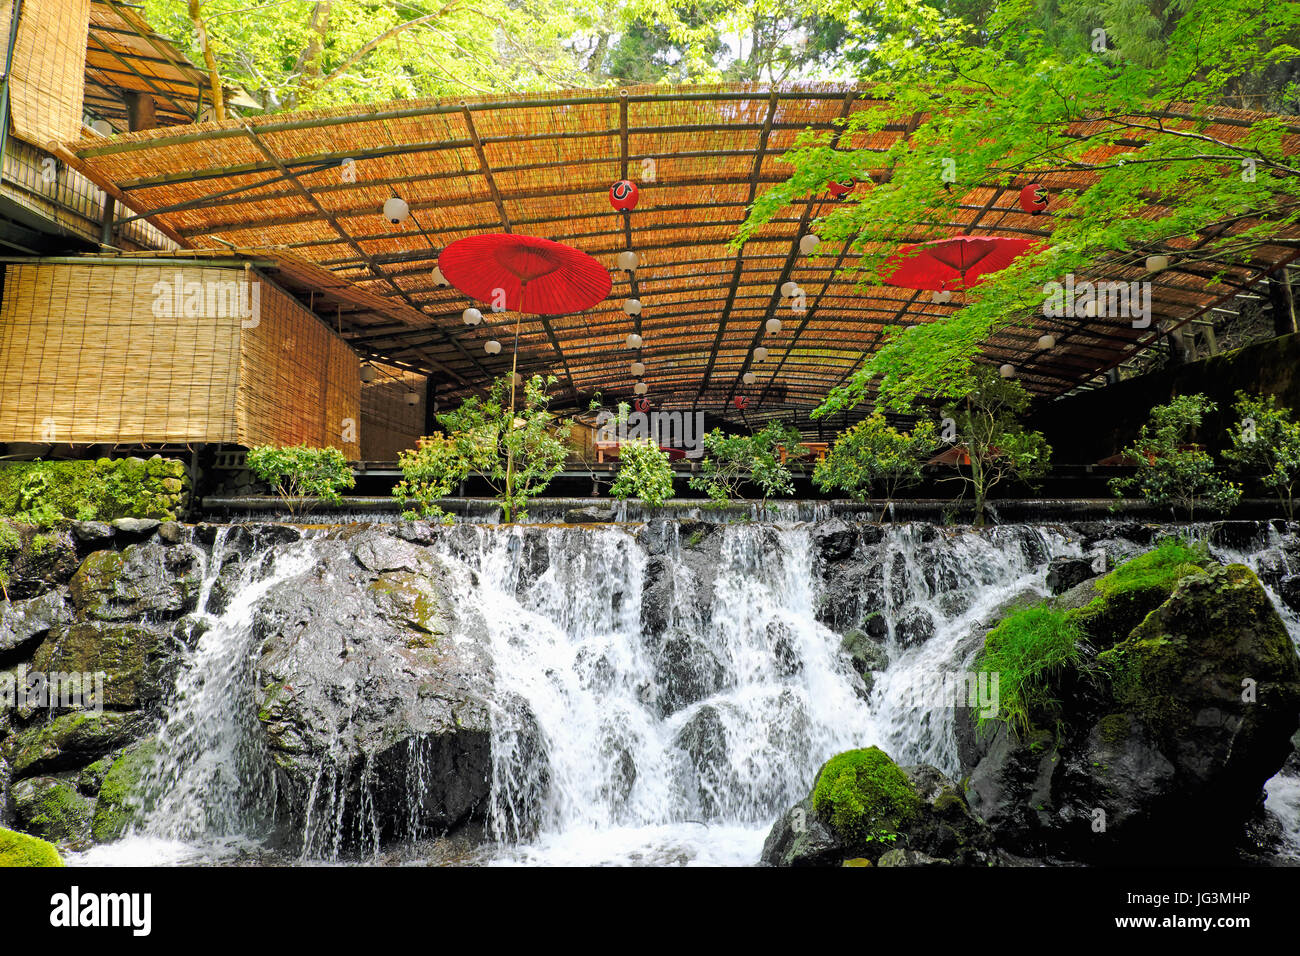 Hirobun restaurant in Kibune. From May to September, visitors can enjoy meals on covered platforms over the river known as kawadoko dining. Stock Photo